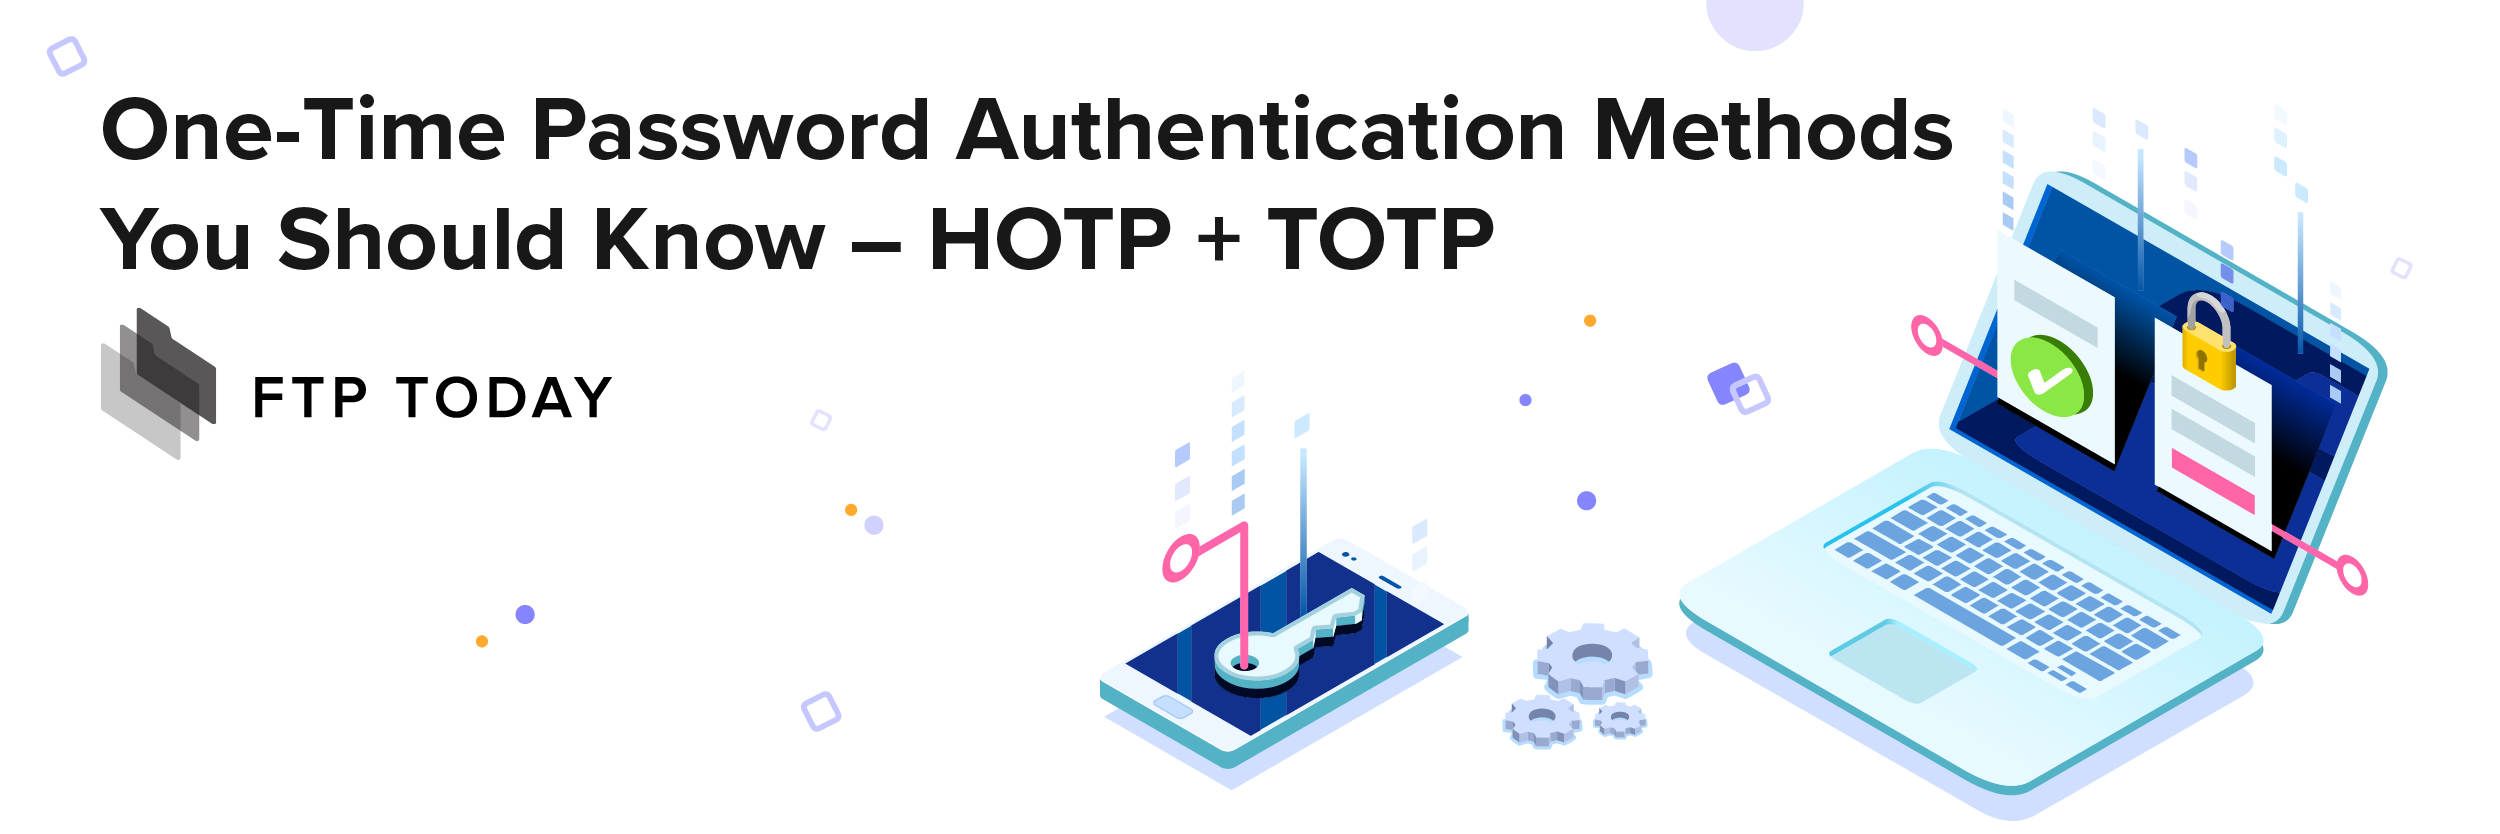 google authenticator totp and hotp mode